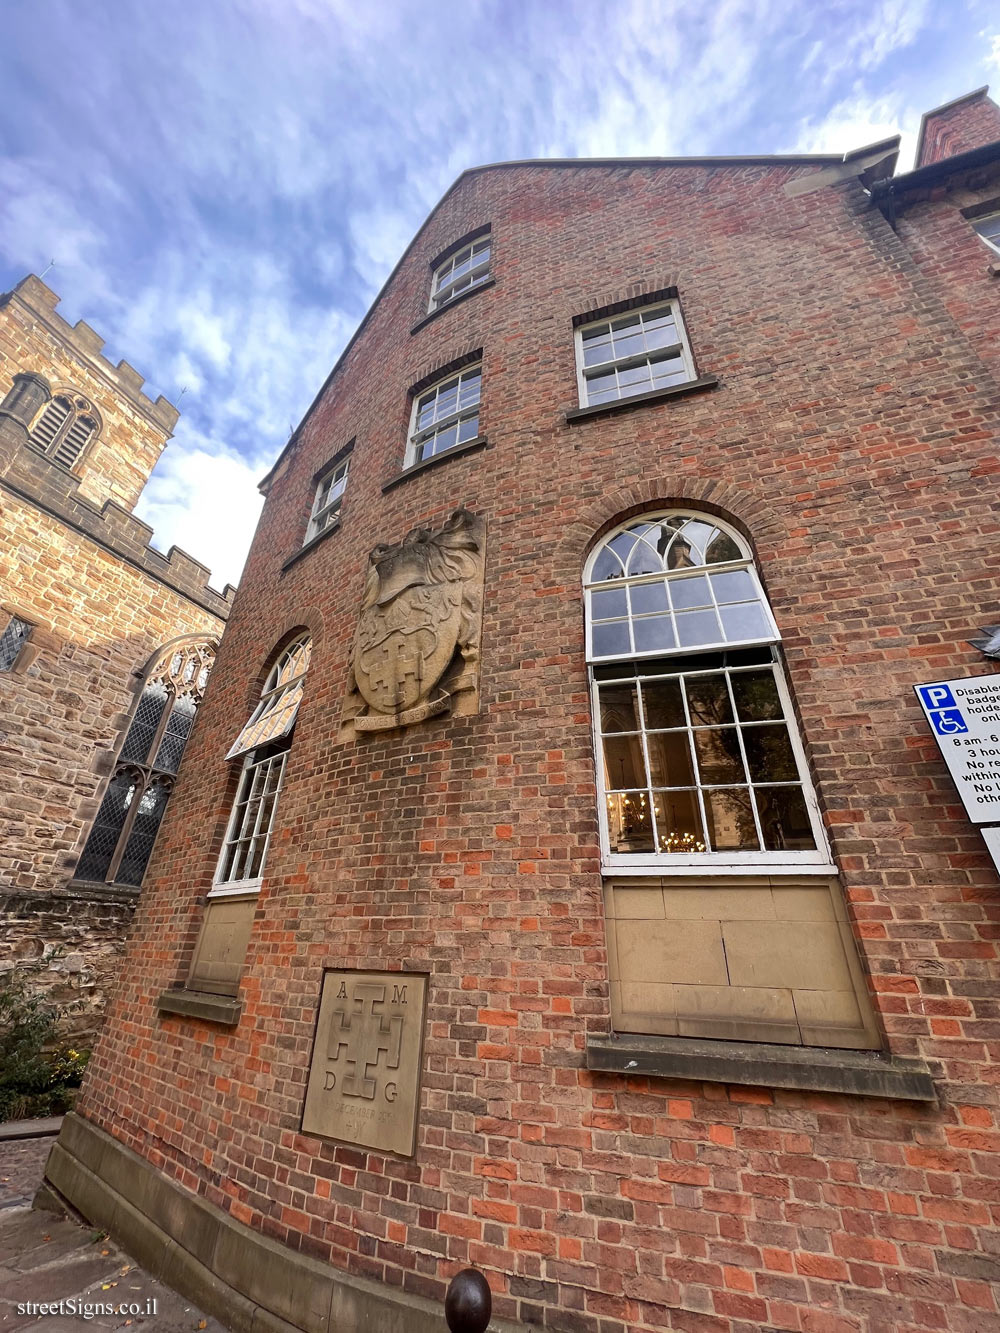 Durham University - the foundation stone for the dining hall at St Chad’s College - 18 N Bailey, Durham DH1 3RH, UK